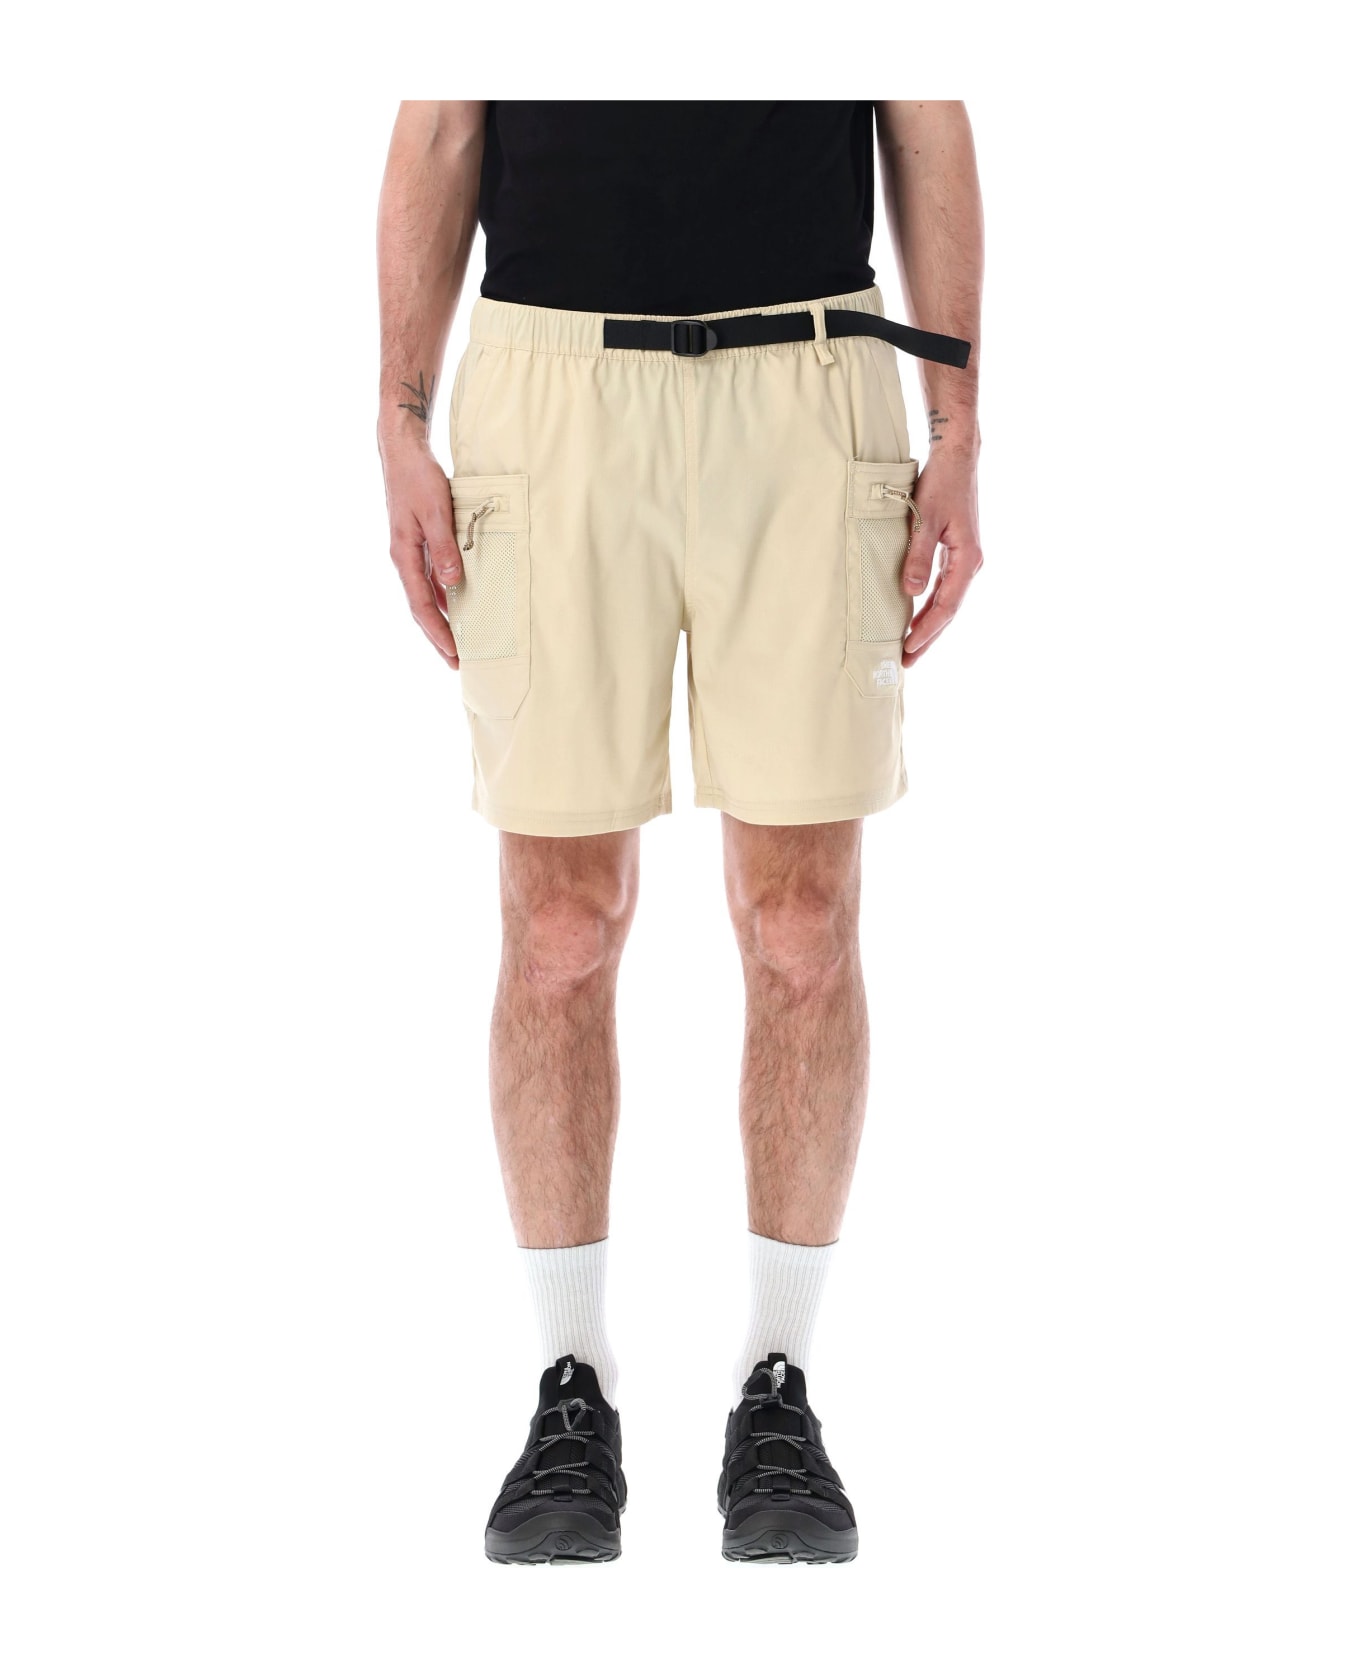 The North Face Ripstop Belted Cargo Short - GRAVEL